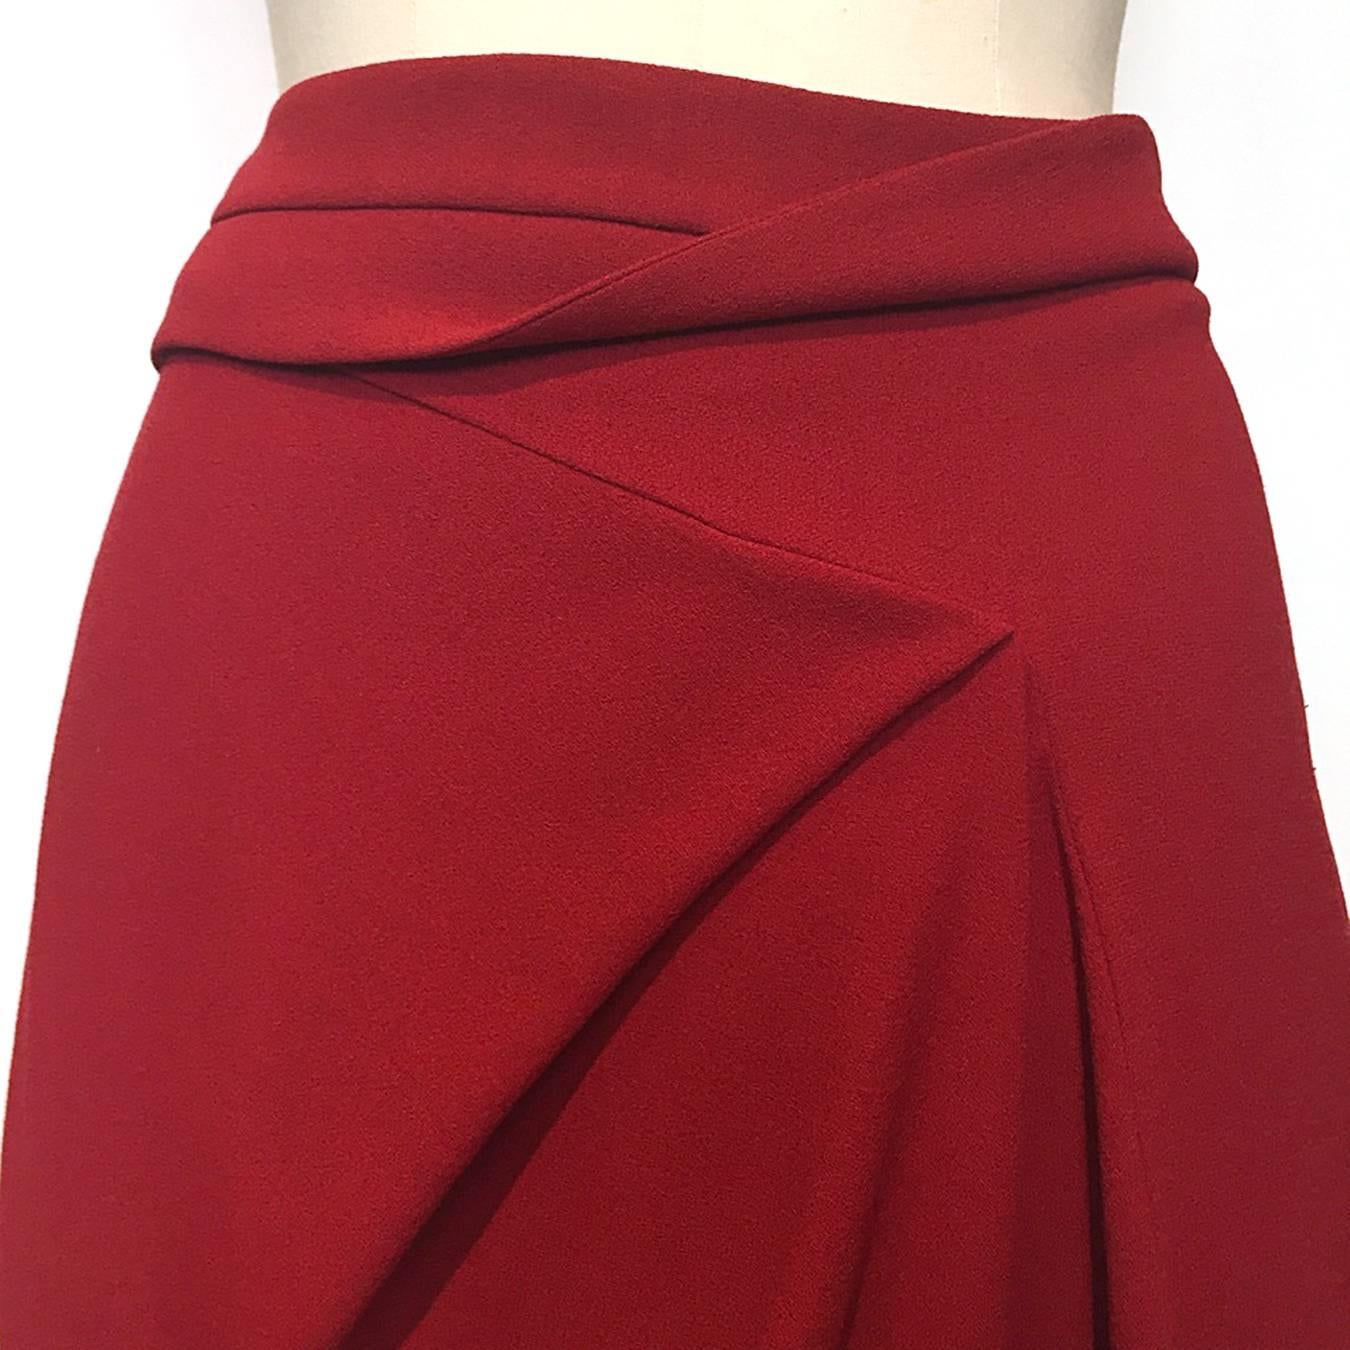 Skirt has a folded waist detail, long asymmetrical front and a shorter back, could almost be a mini skirt but slightly longer. The hight tech fabric gives this skirt the futuristic feeling of modernity. 